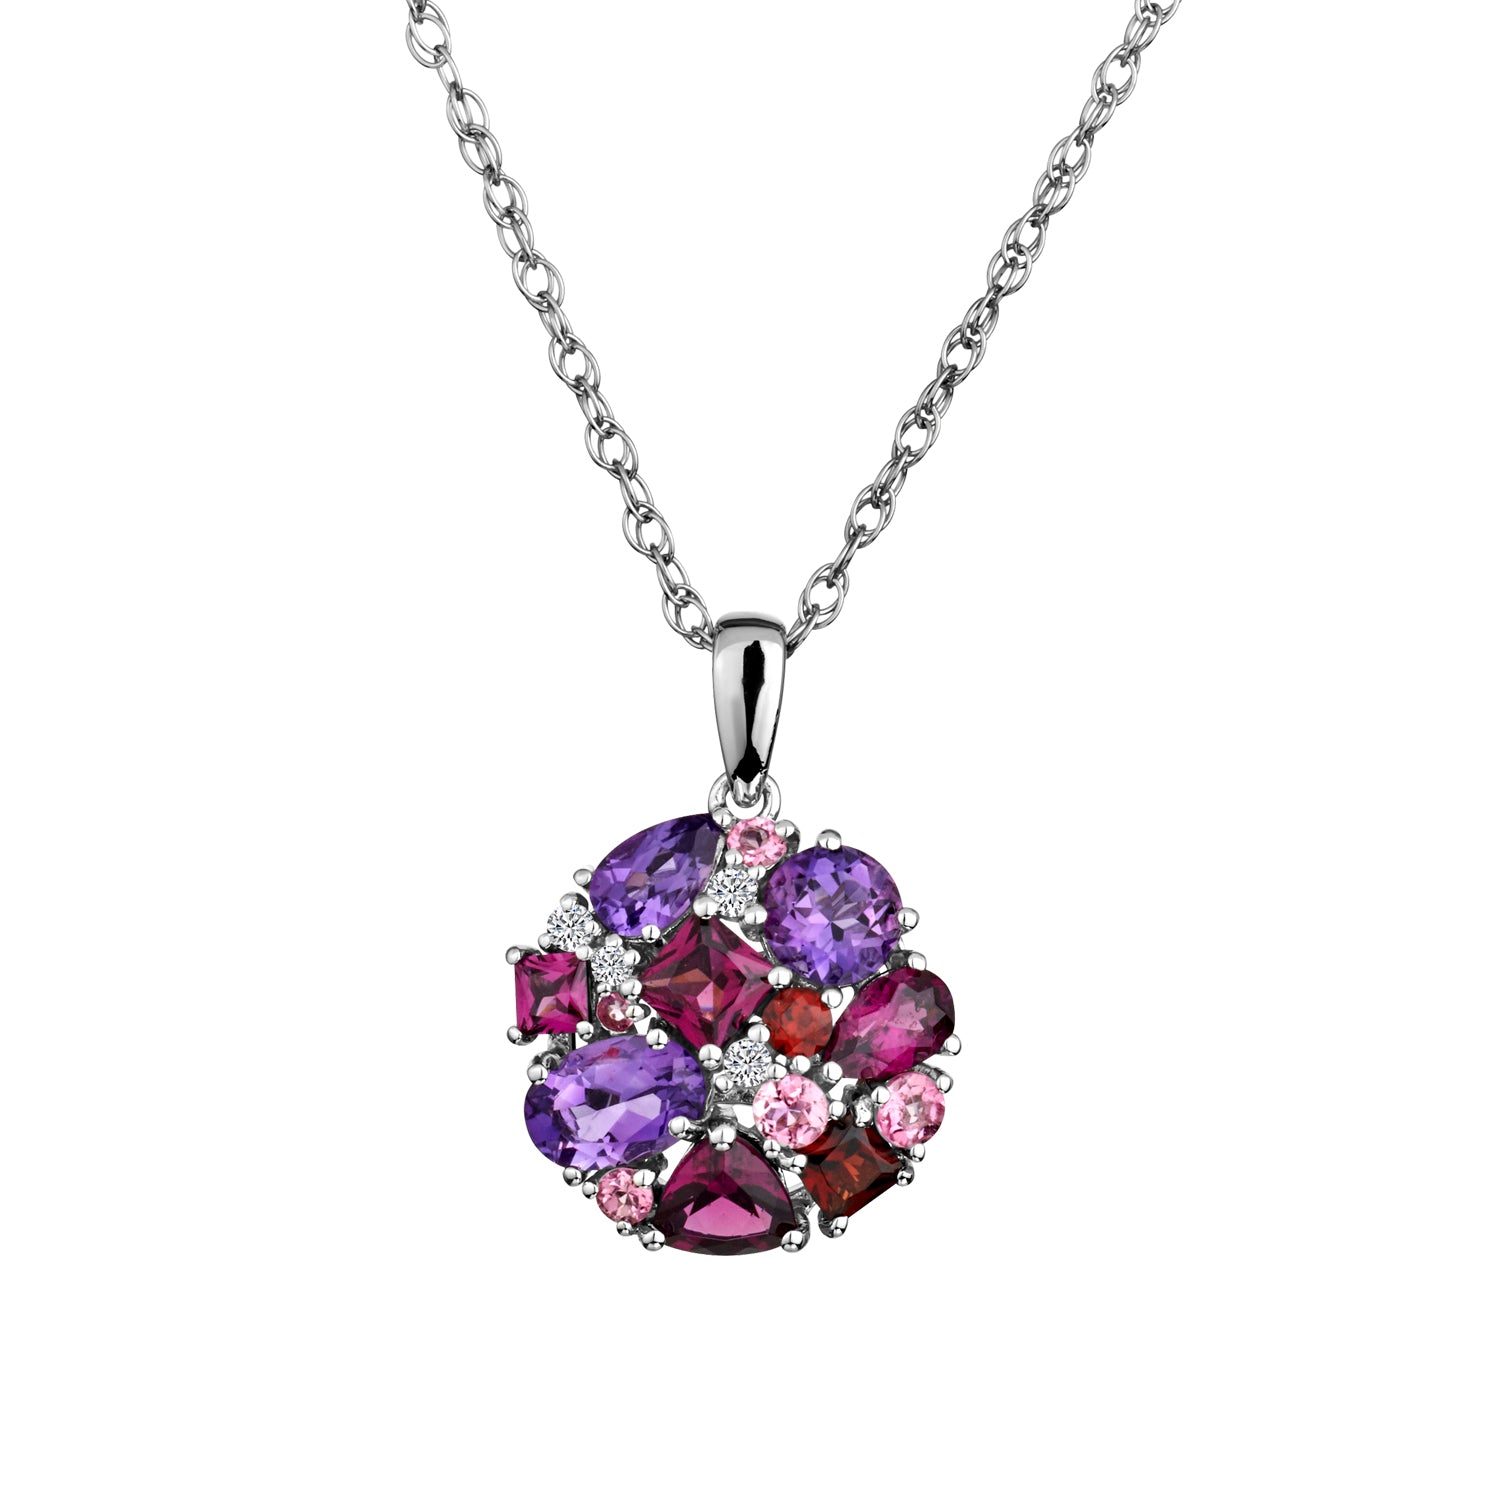 GENUINE GARNET, AMETHYST, PINK TOURMALINE, AND WHITE SAPPHIRE PENDANT, SILVER, WITHL SILVER CHAIN.....................NOW